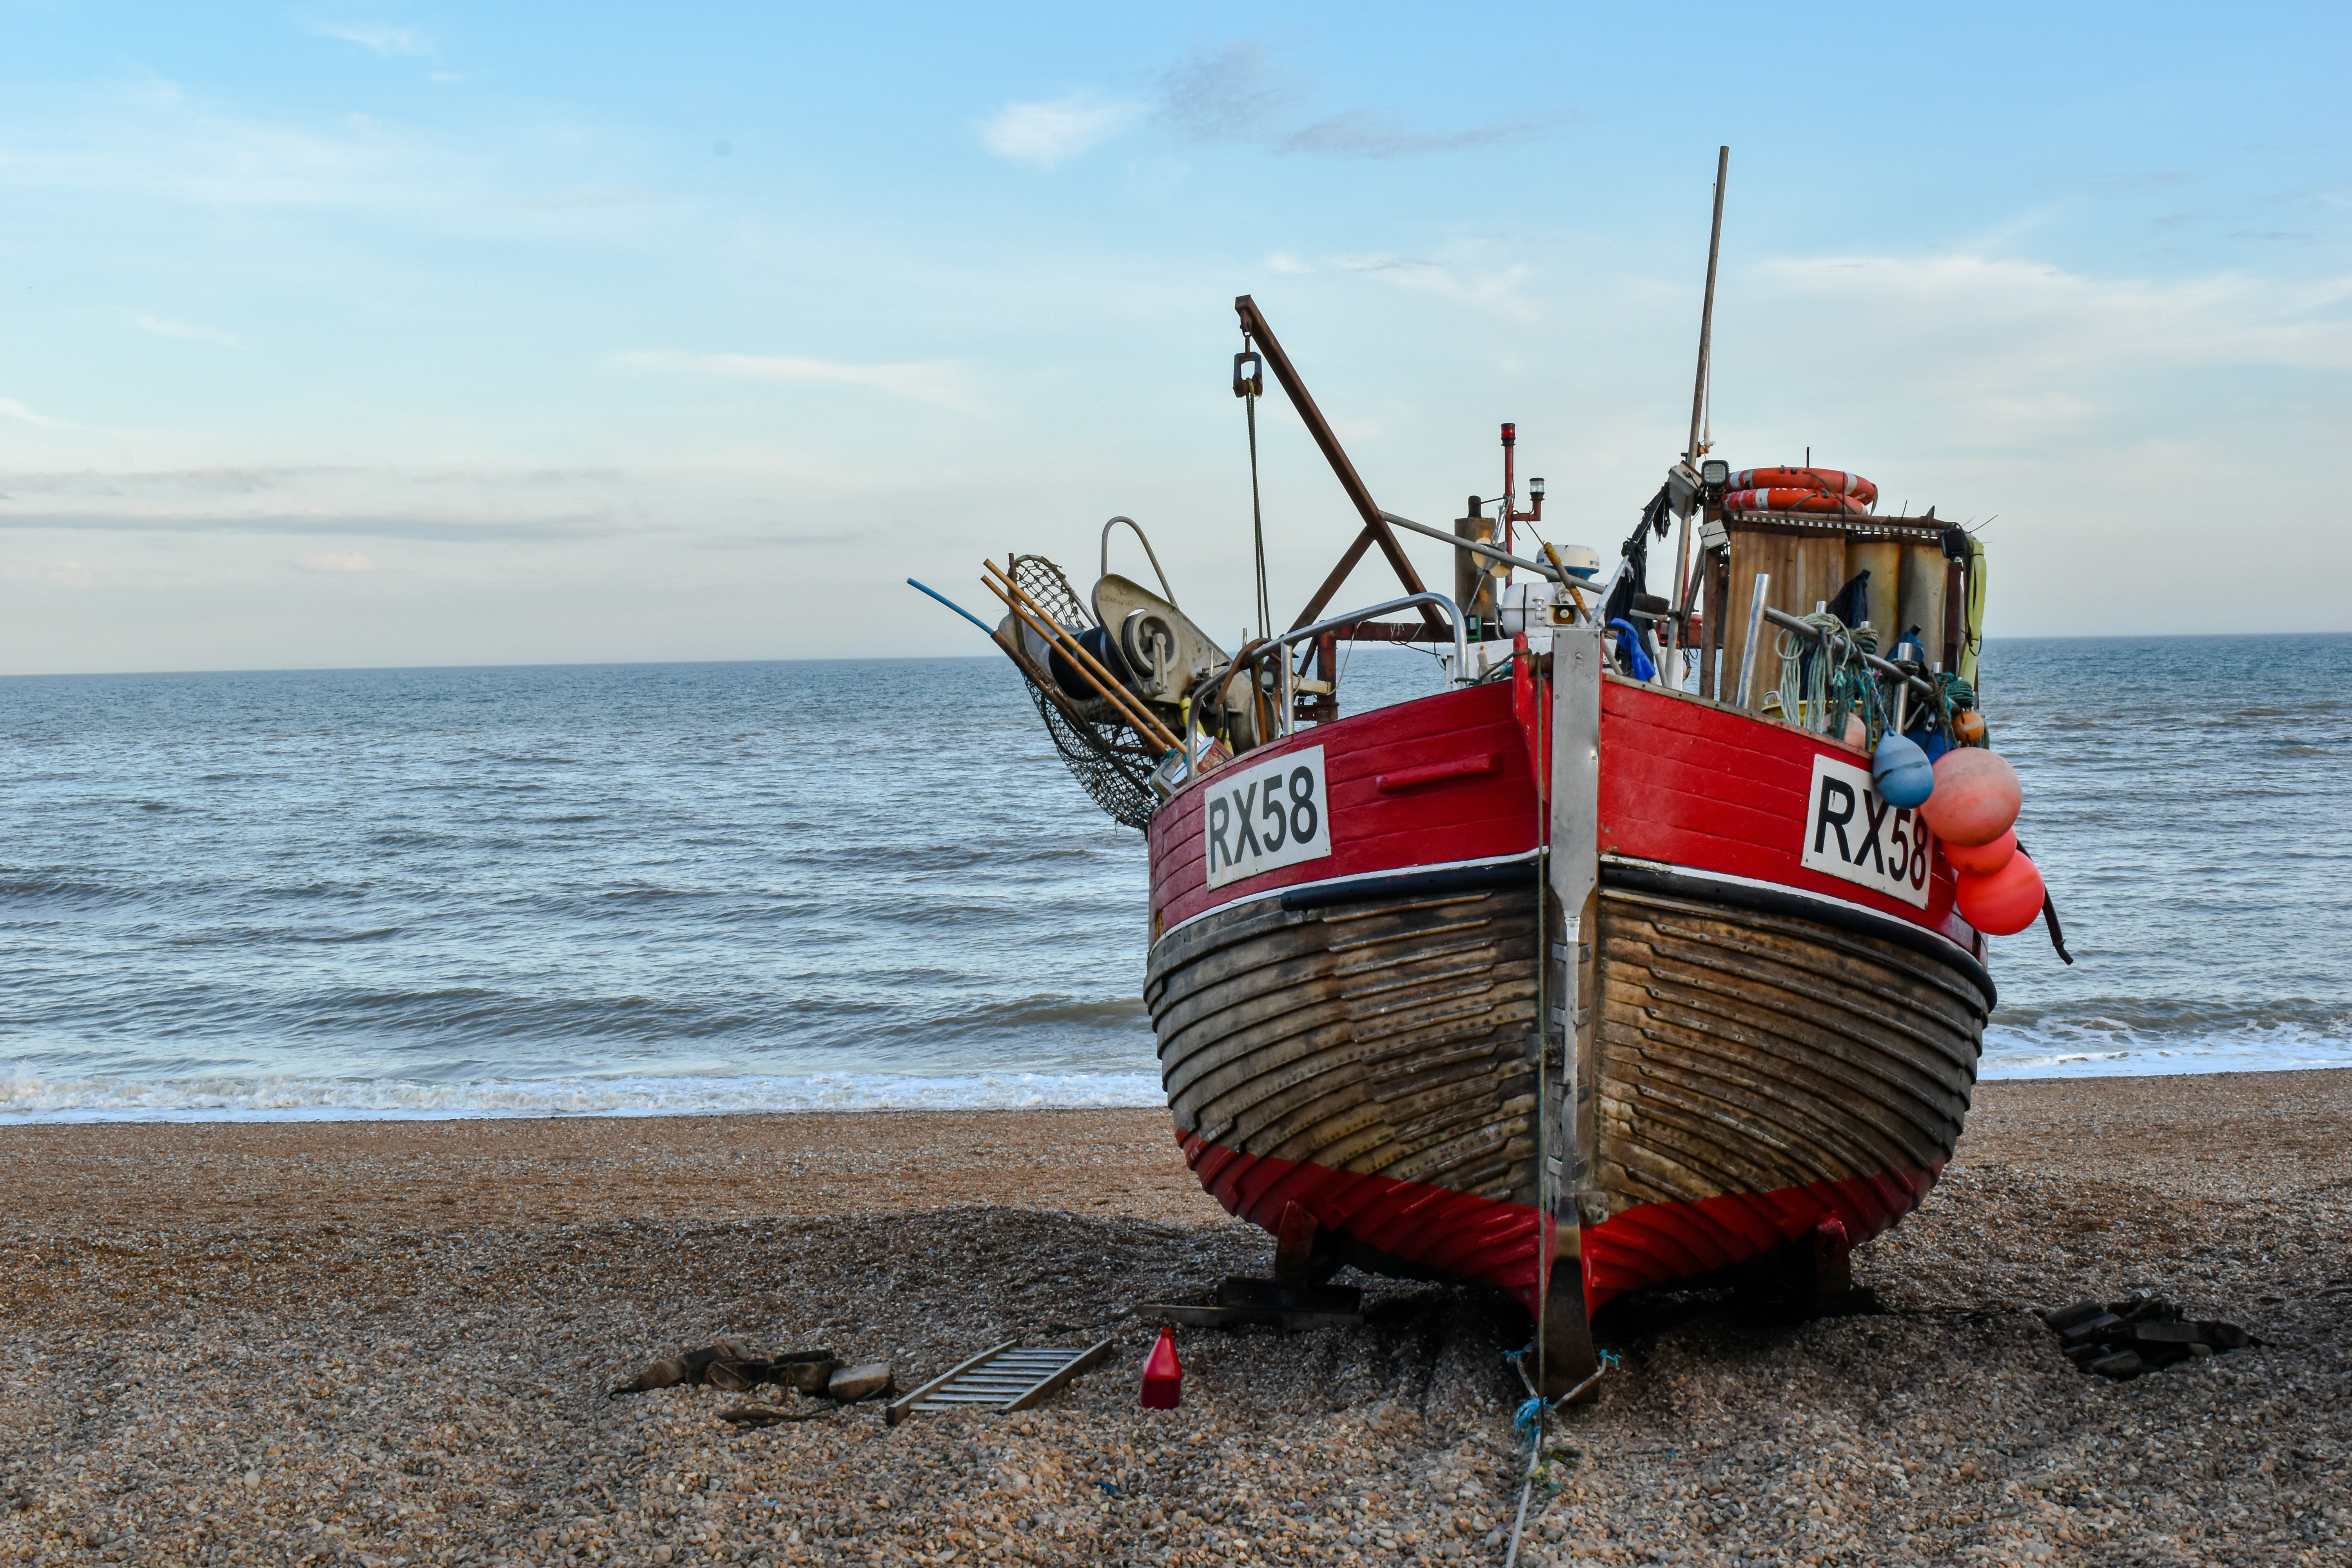 brown and red boat on beach during daytime